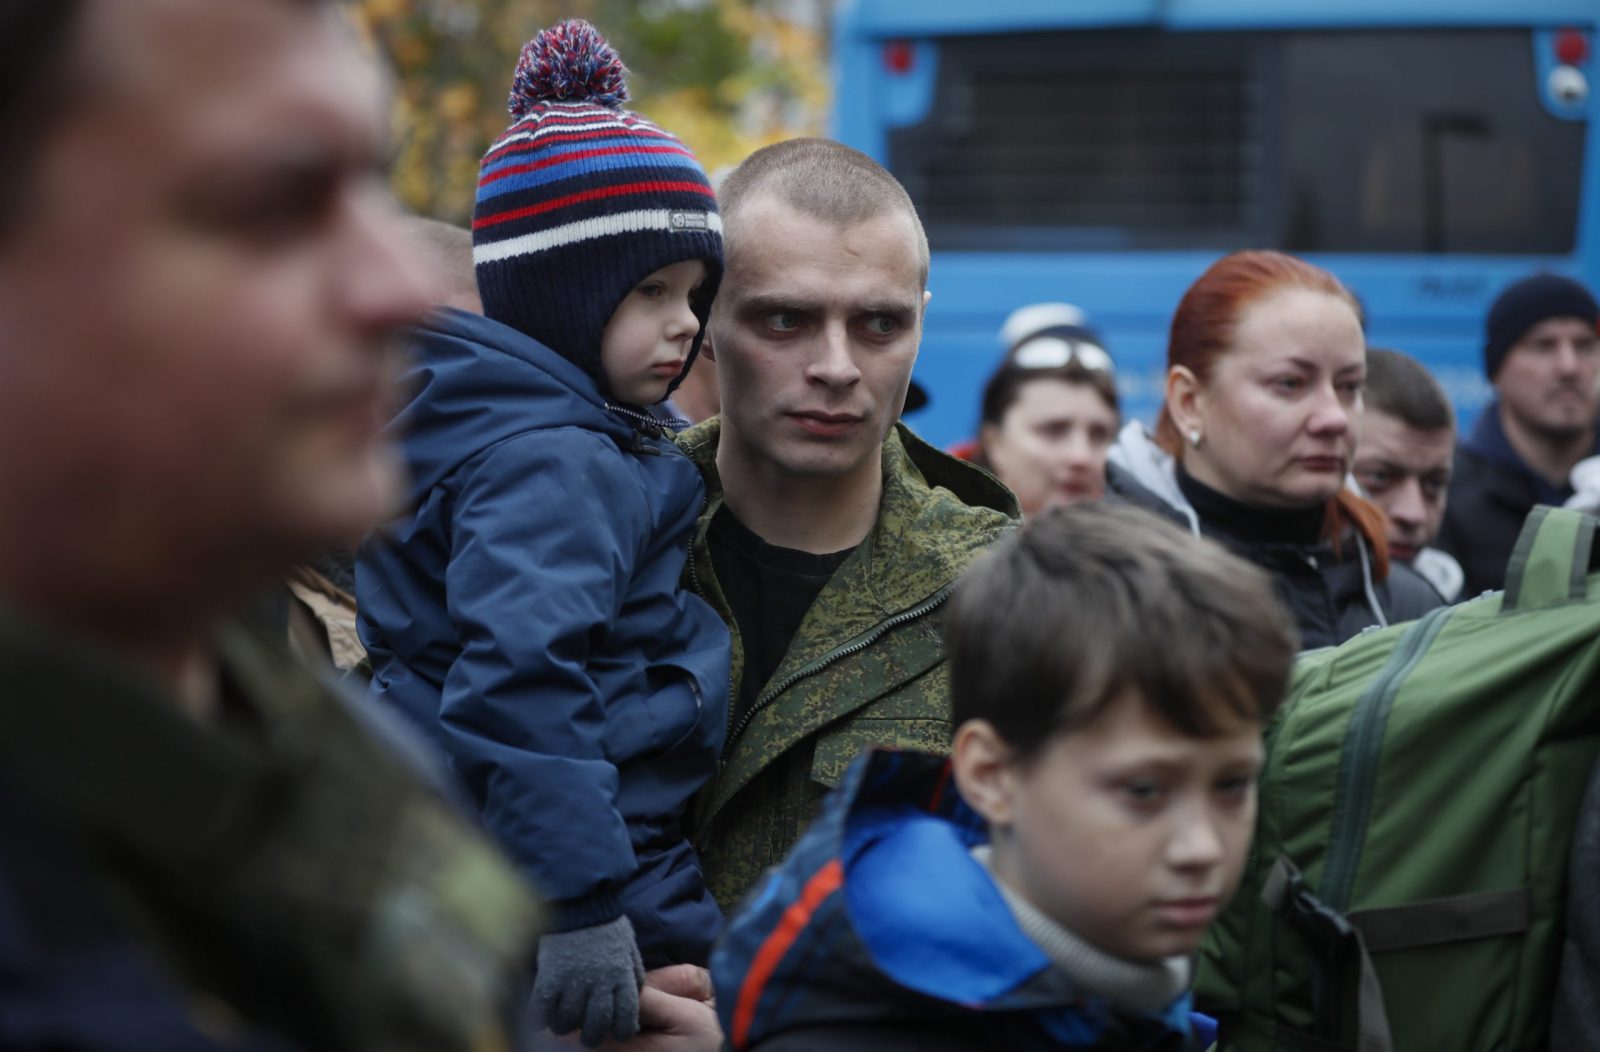 epa10238559 Russian conscripted man holds his child near a recruiting office during Russia's partial military mobilization in Moscow, Russia, 12 October 2022. Russian President Putin announced in a televised address to the nation on 21 September, that he signed a decree on partial mobilization in the Russian Federation due to the conflict in Ukraine. Russian Defense Minister Shoigu said that 300,000 people would be called up for service as part of the move.  EPA/YURI KOCHETKOV